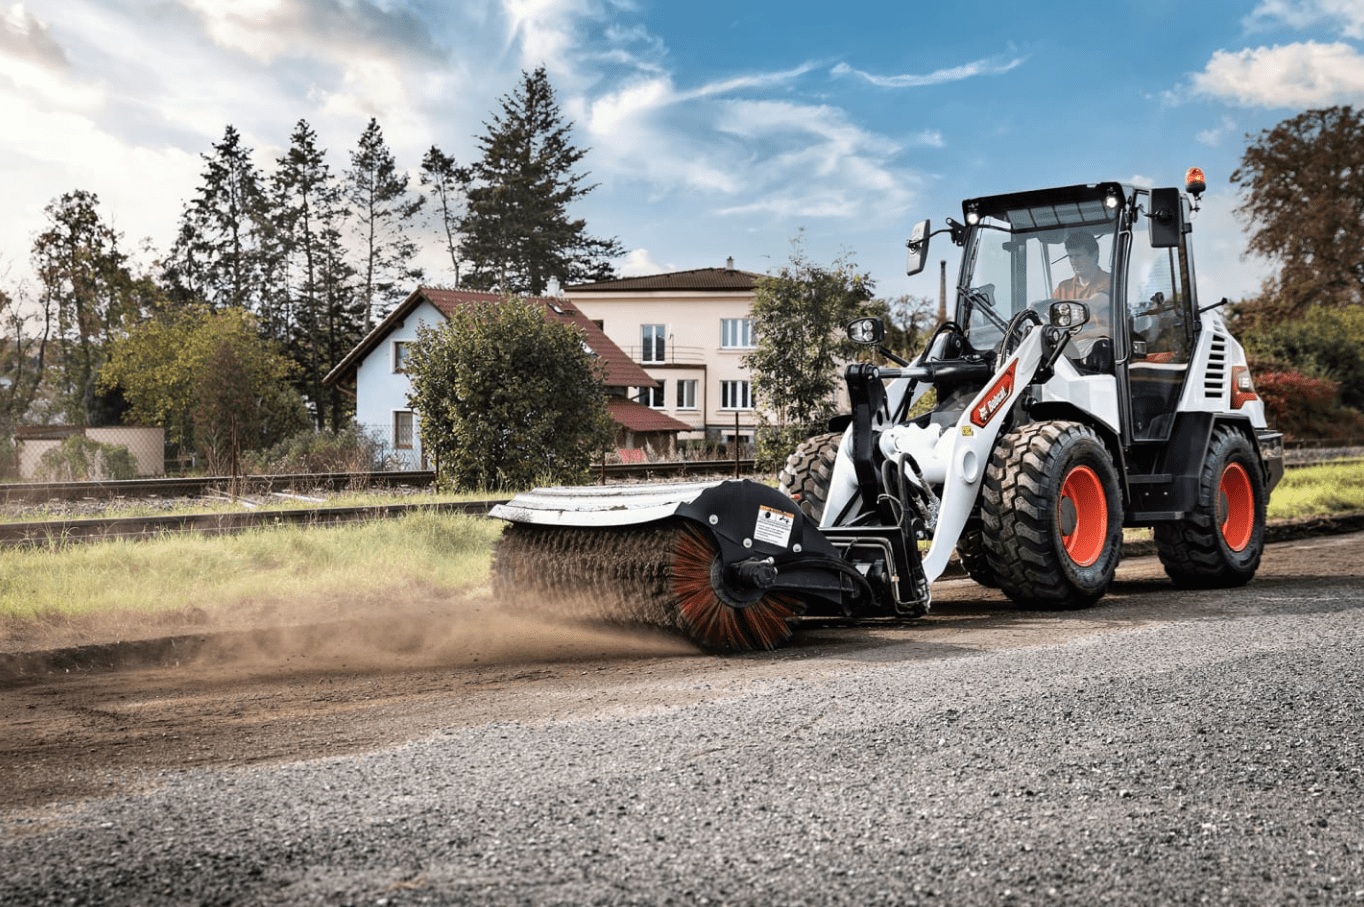 Browse Specs and more for the Bobcat L85 Compact Wheel Loader - KC Bobcat